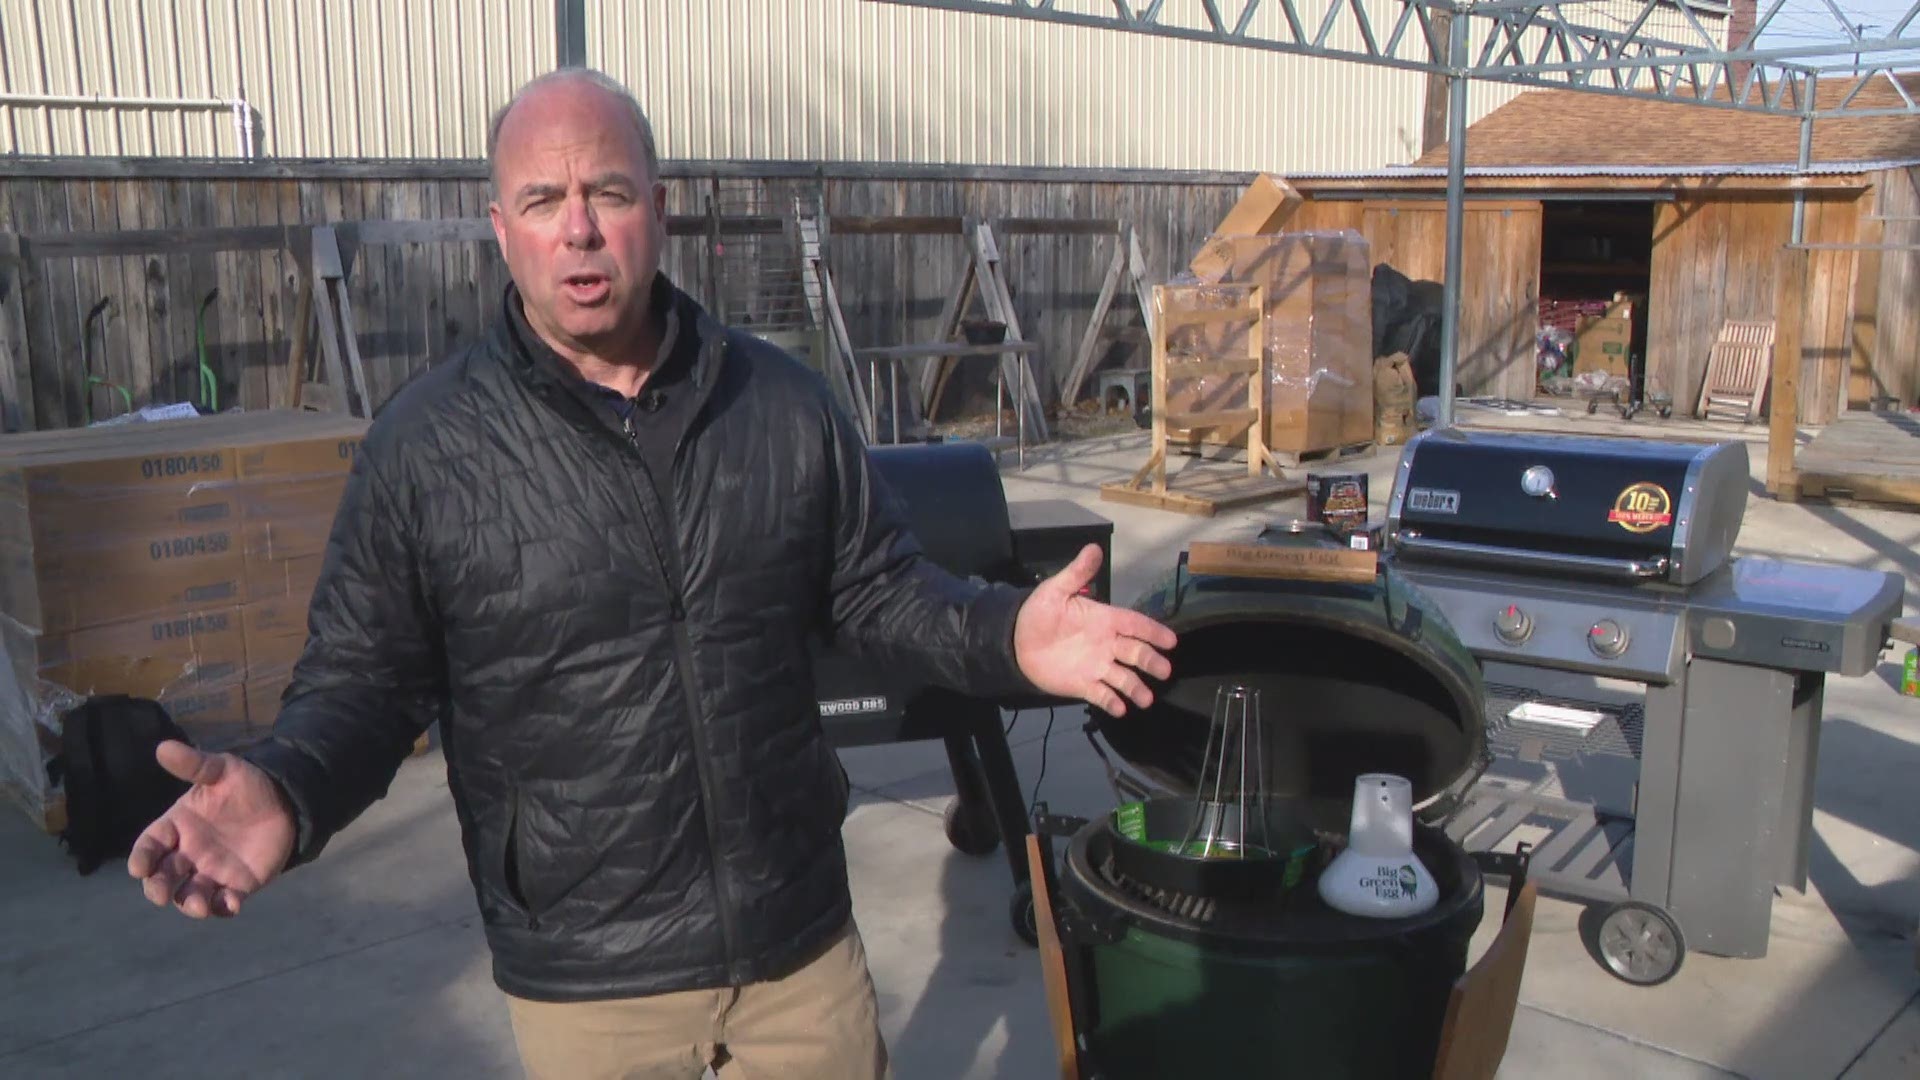 Pat shows us how to cook a turkey in a trash can for Thanksgiving.